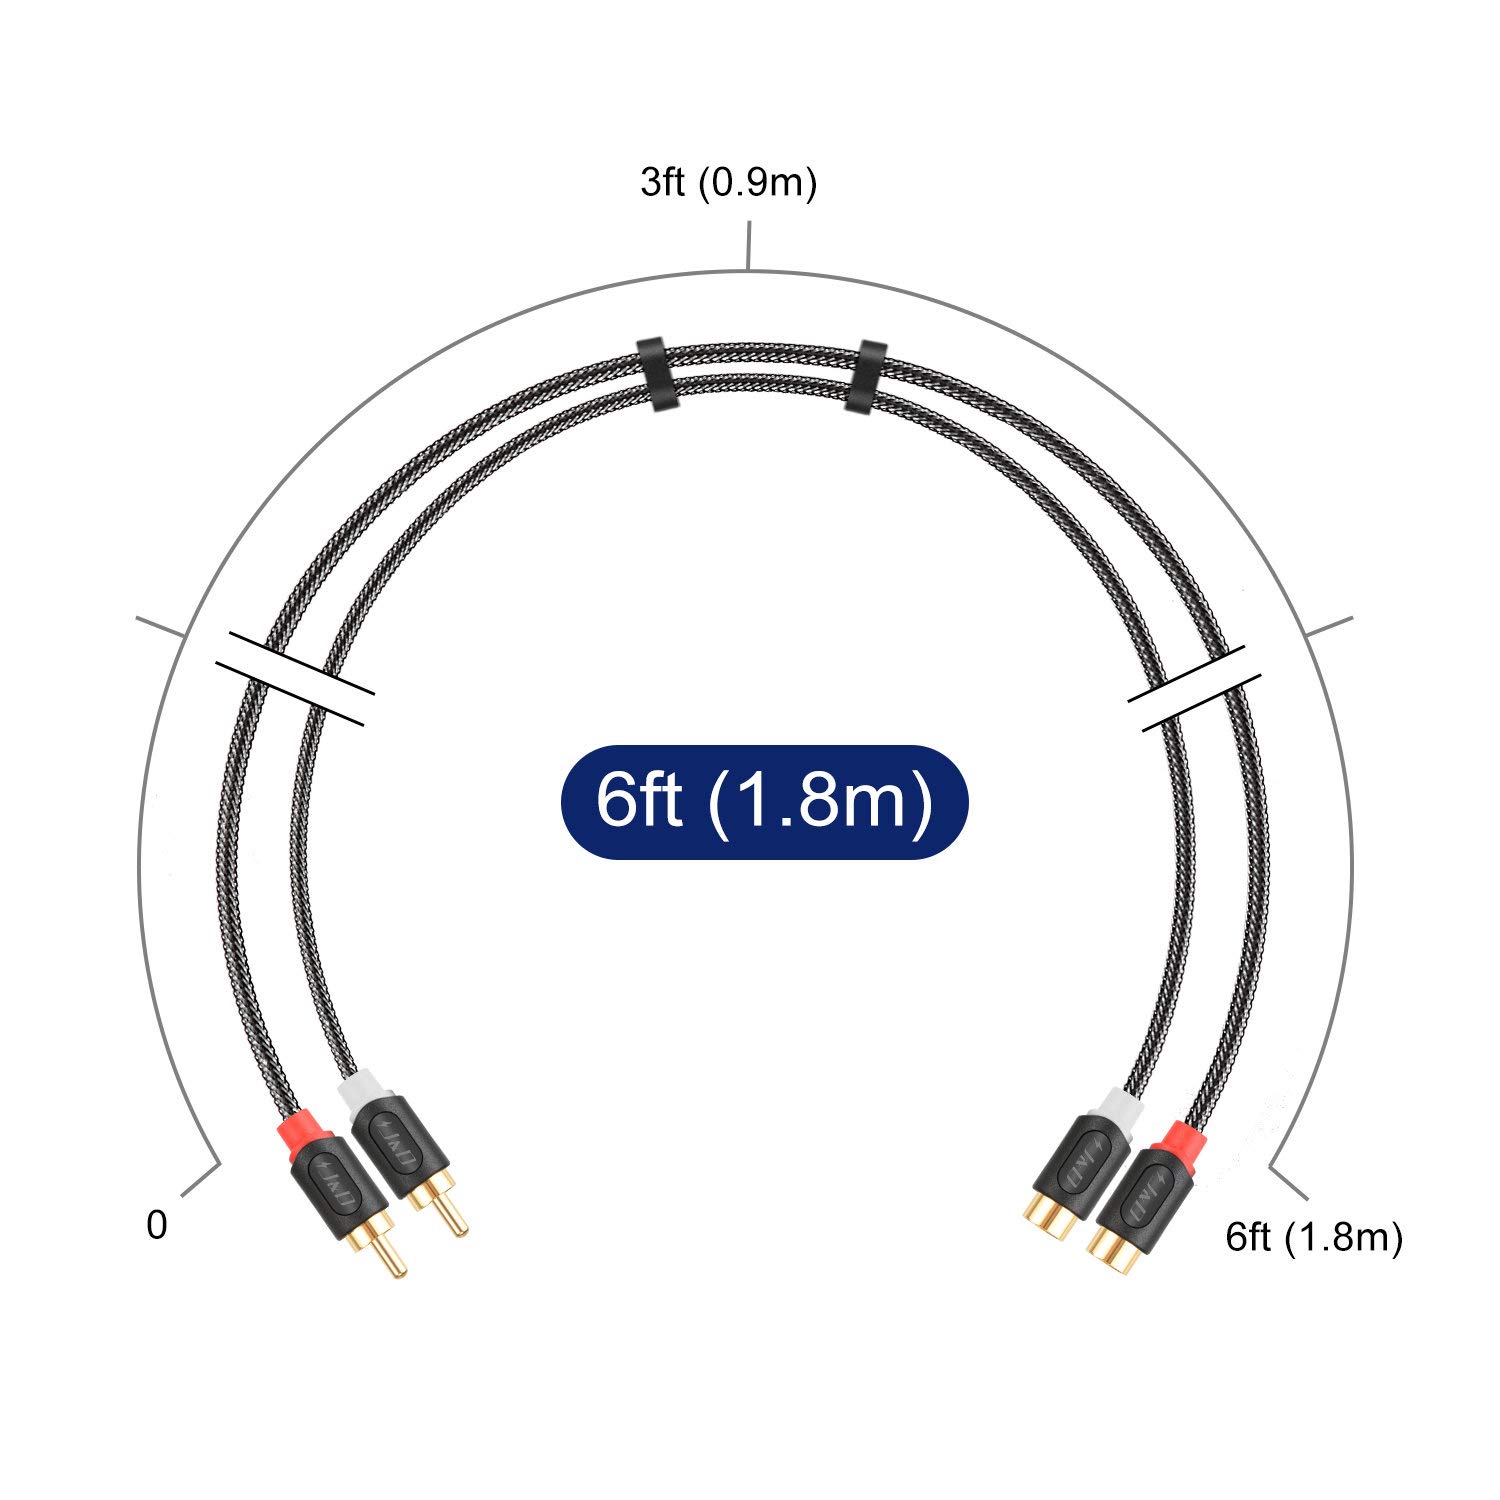 J&D 2 RCA Male to 2 RCA Female Stereo Audio Extension Cable, PVC Shelled and Nylon Braid, 6ft - image 4 of 5